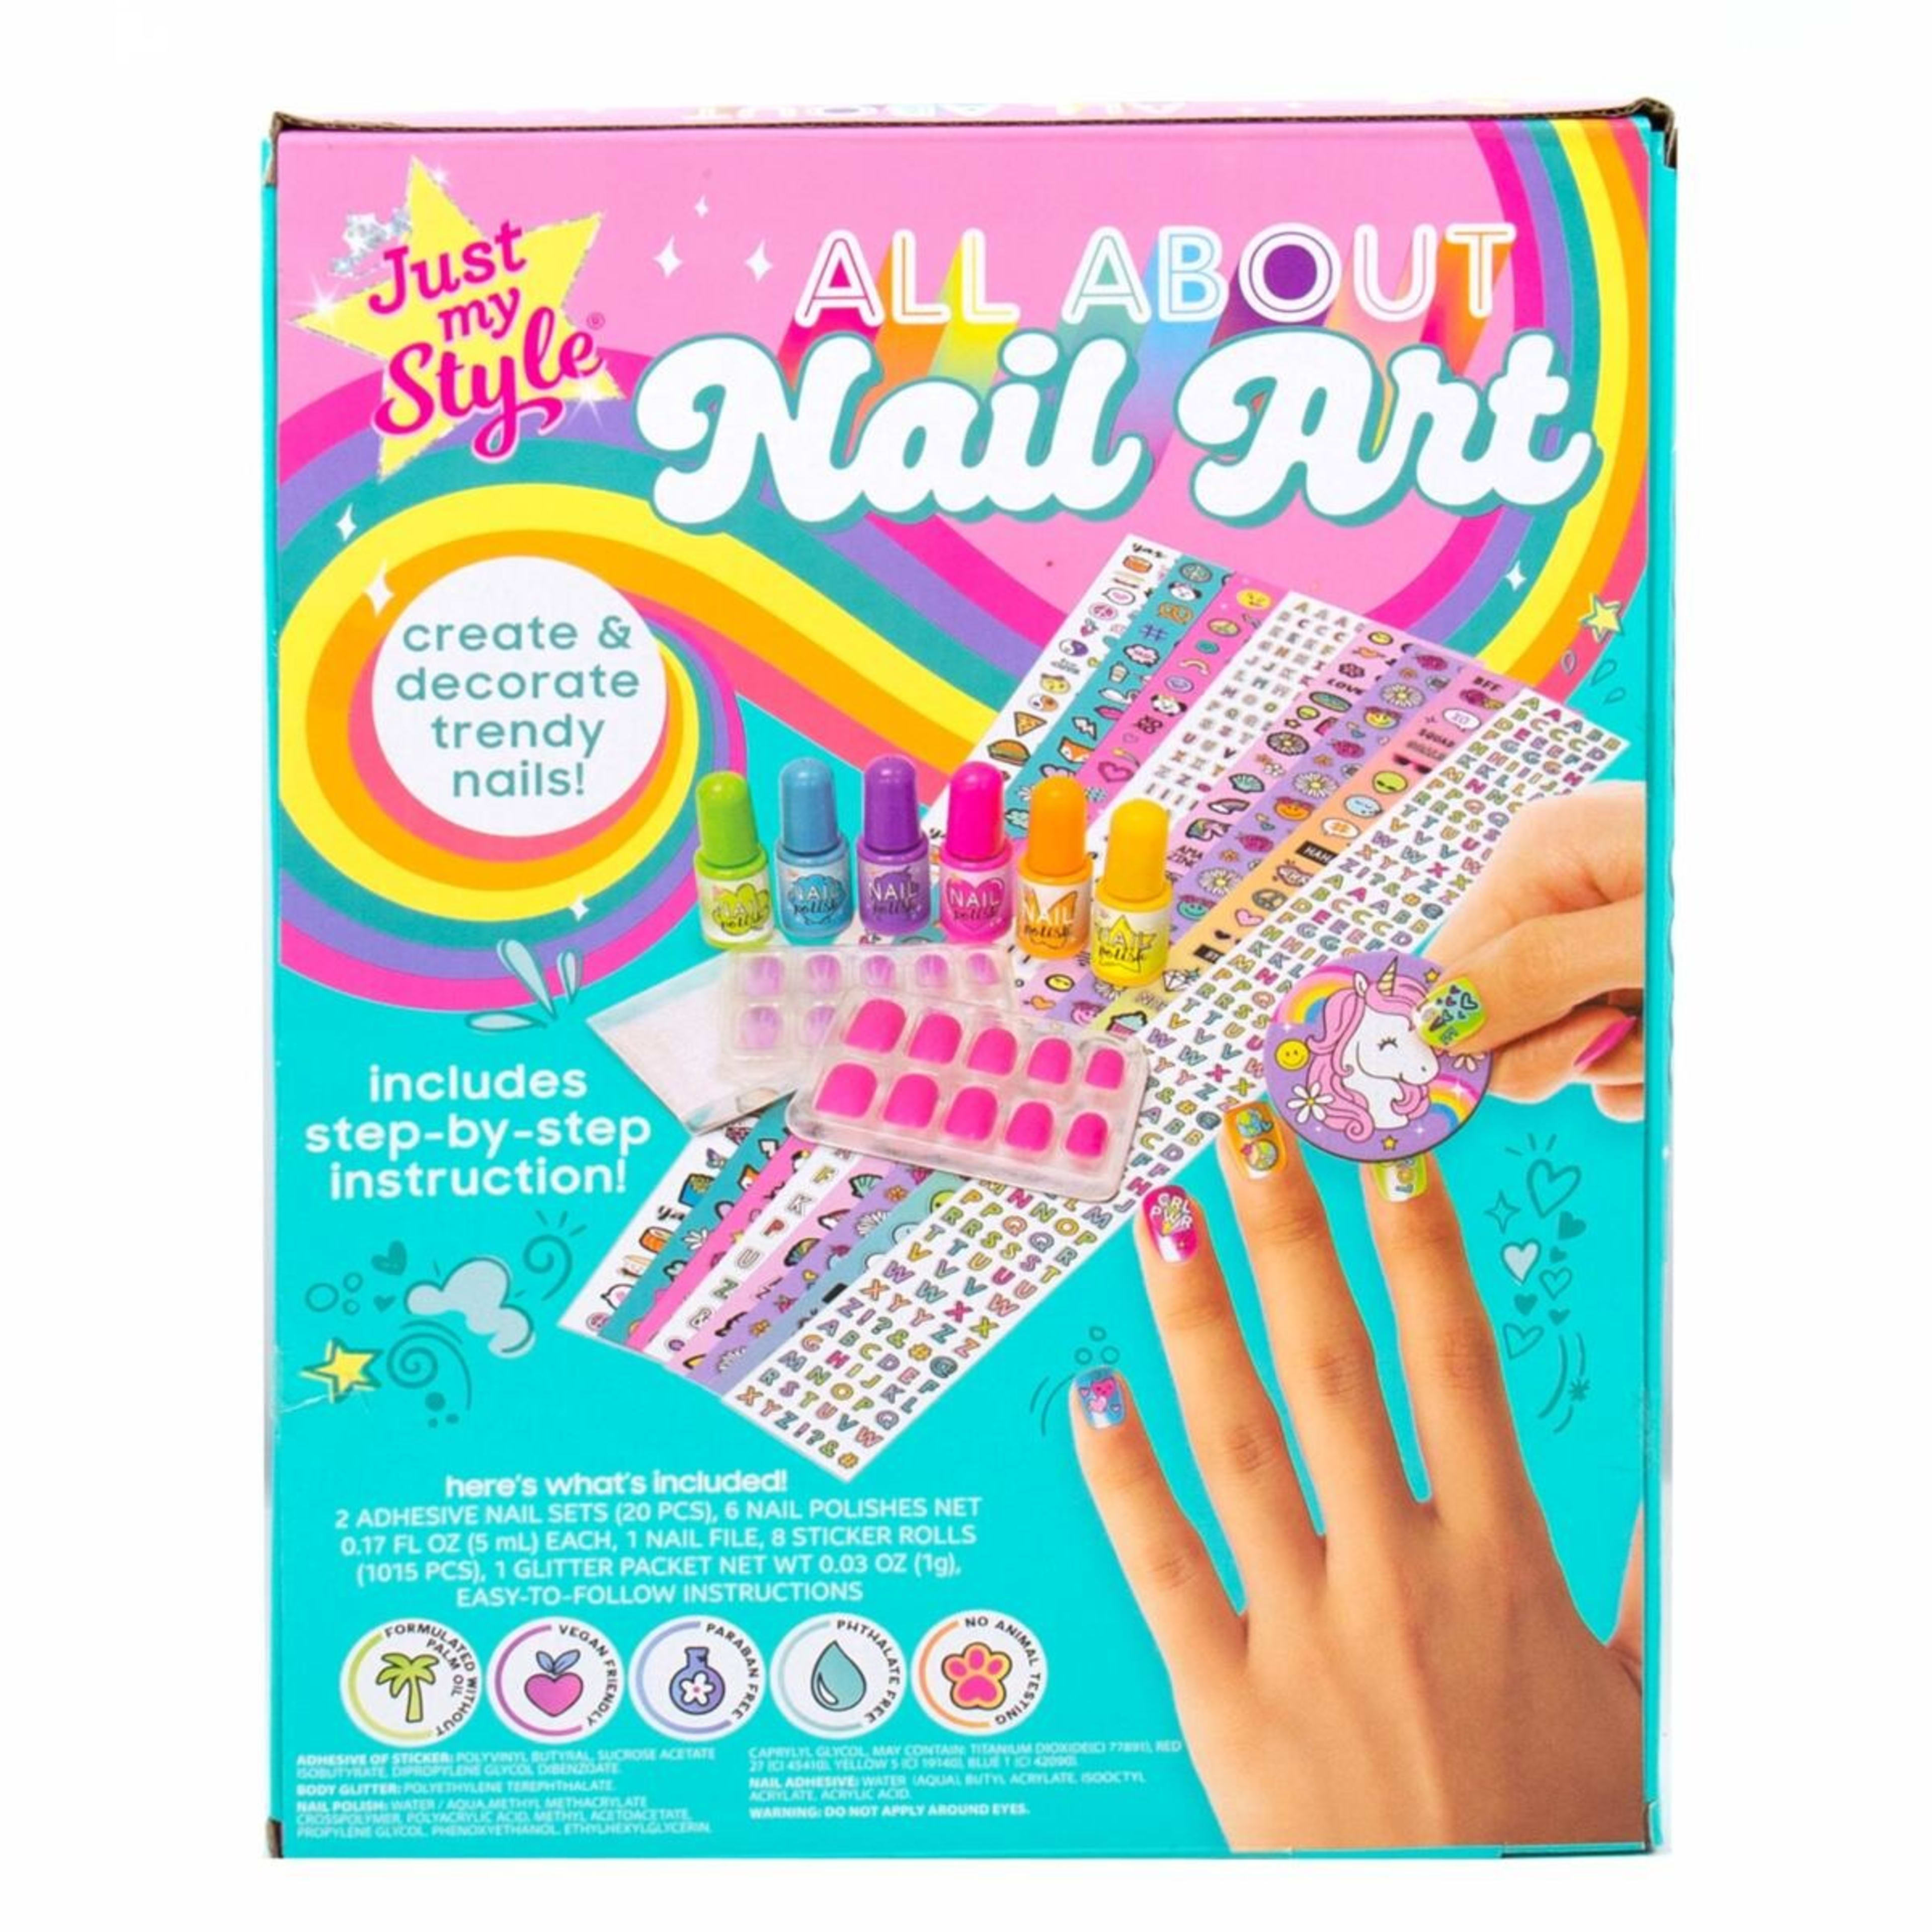 Just My Style All About Nail Art Kit - Kmart